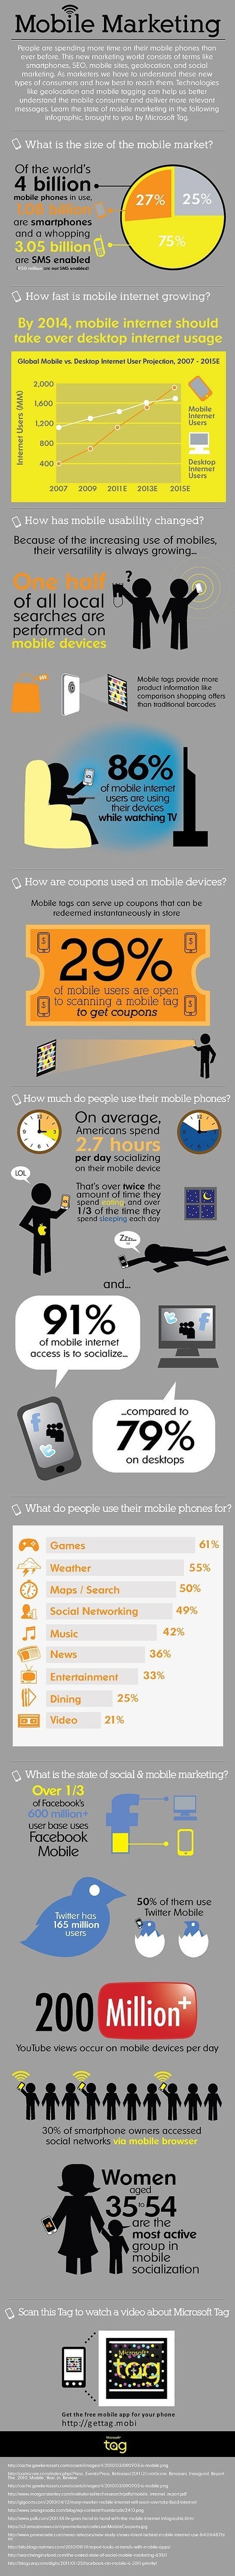 The Mobile Social Audience is Evolving - Here's What's Happening [Infographic] | mlearn | Scoop.it